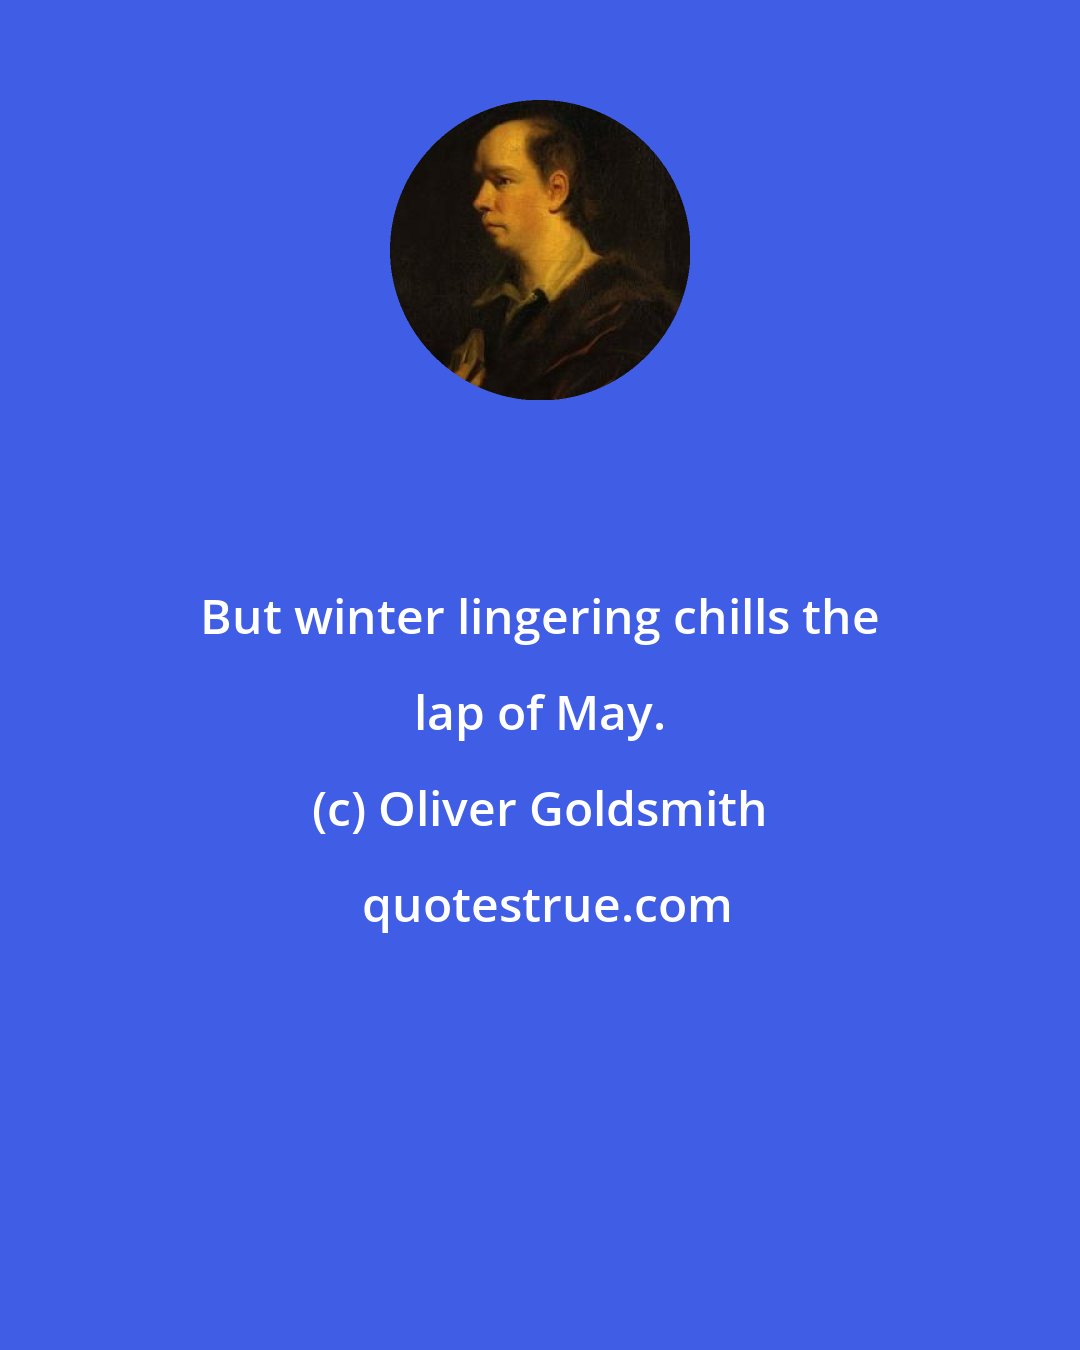 Oliver Goldsmith: But winter lingering chills the lap of May.